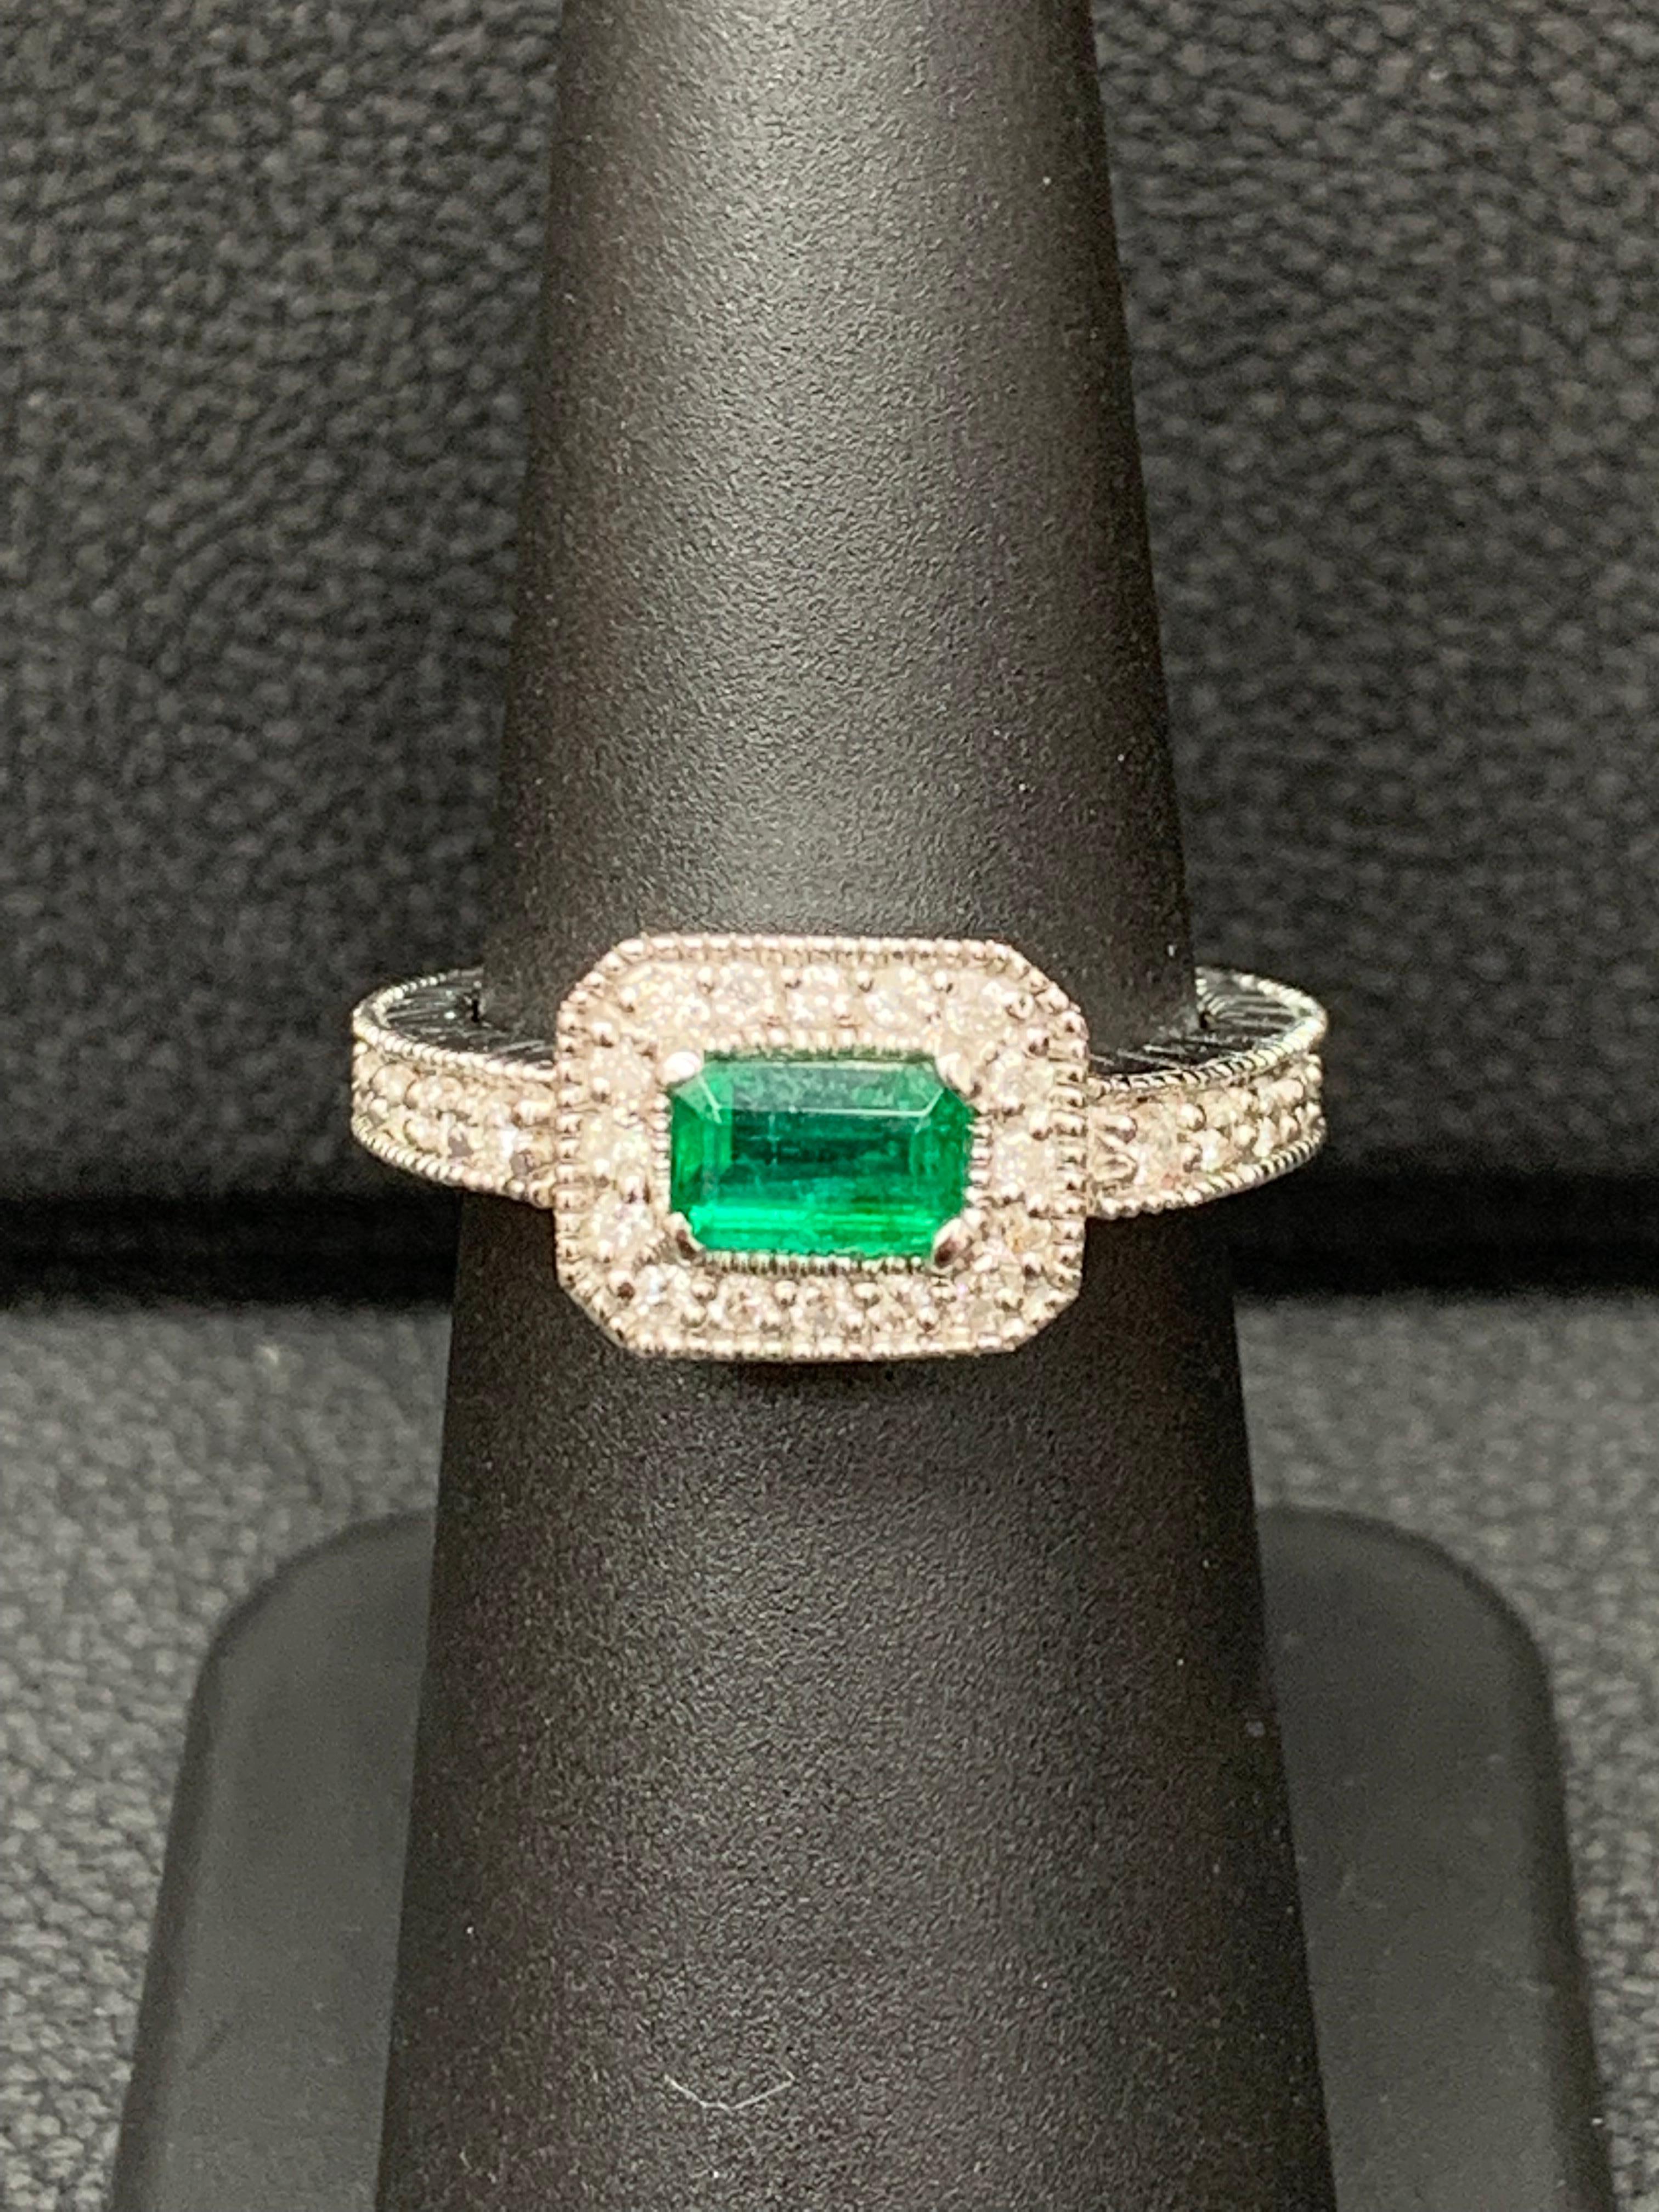 0.70 Carat Emerald-Cut Emerald and Diamond Ring in 14K White Gold For Sale 3